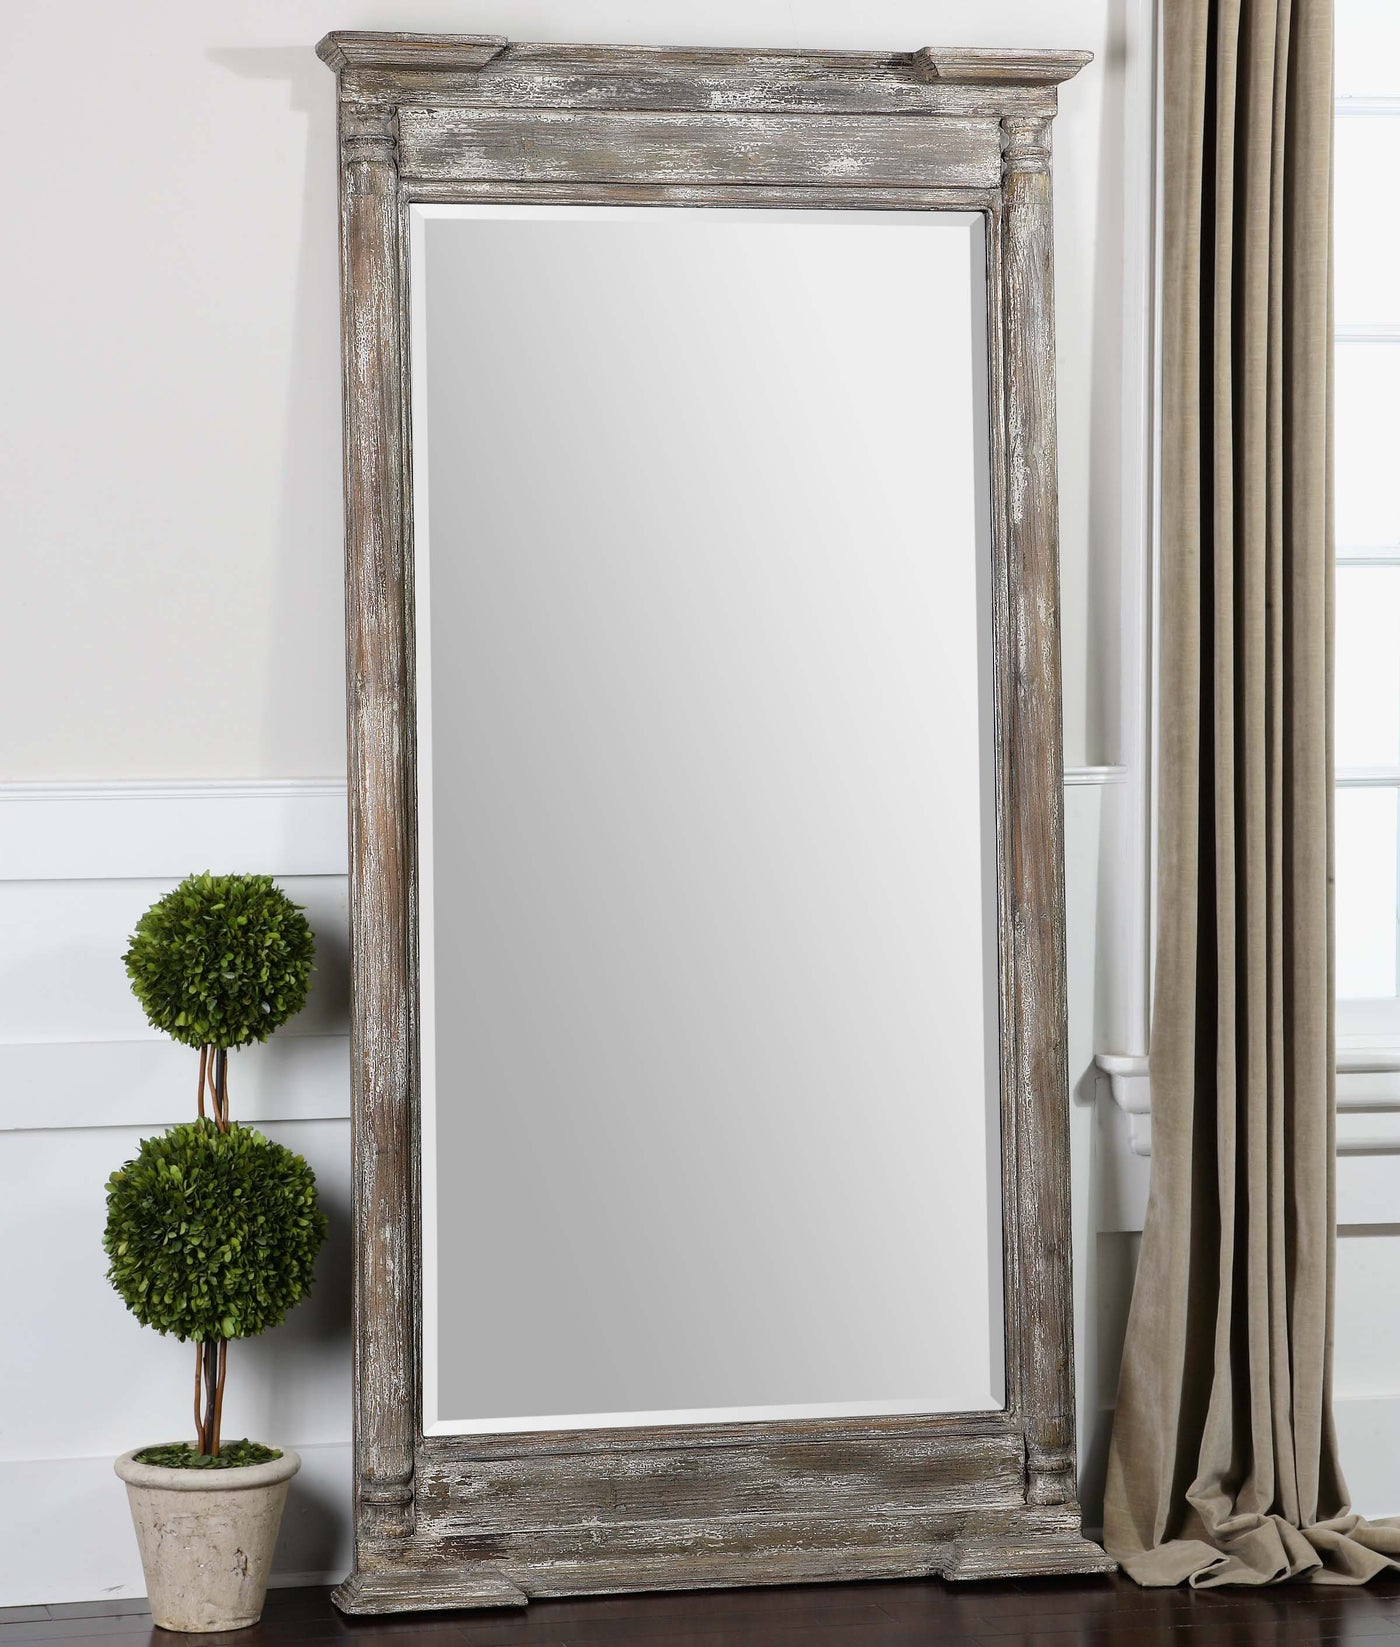 Frame Is Made Of Weathered Wood Covered In A Distressed Ivory Gray Finish. Mirror Features A Generous 1 1/4" Bevel And May...